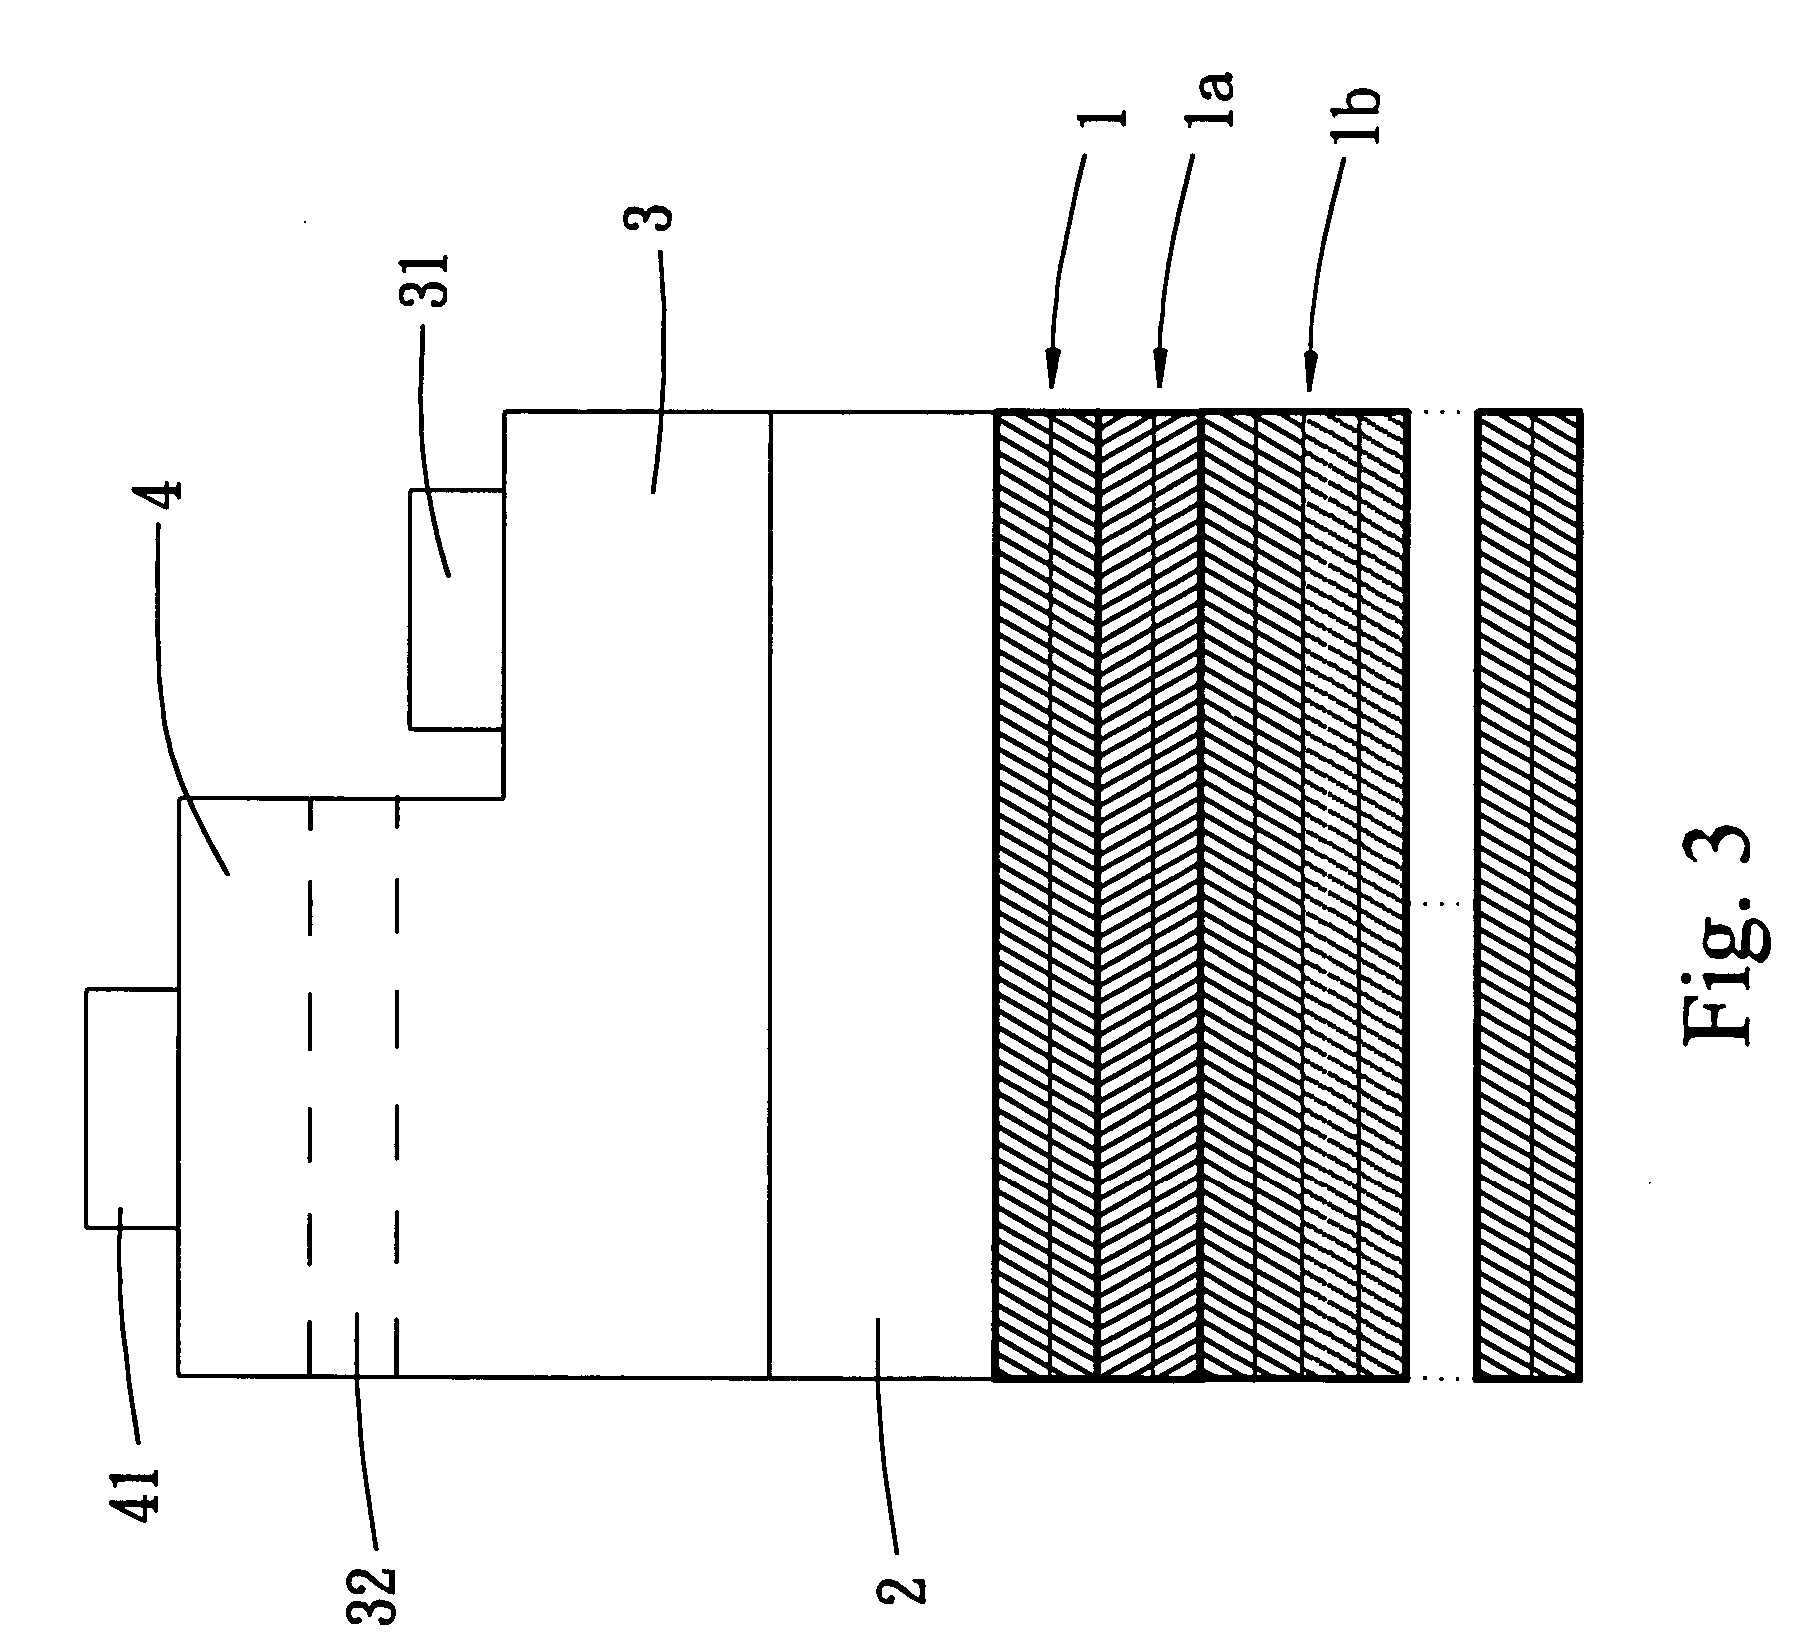 Light-emitting diode having chemical compound based reflective structure